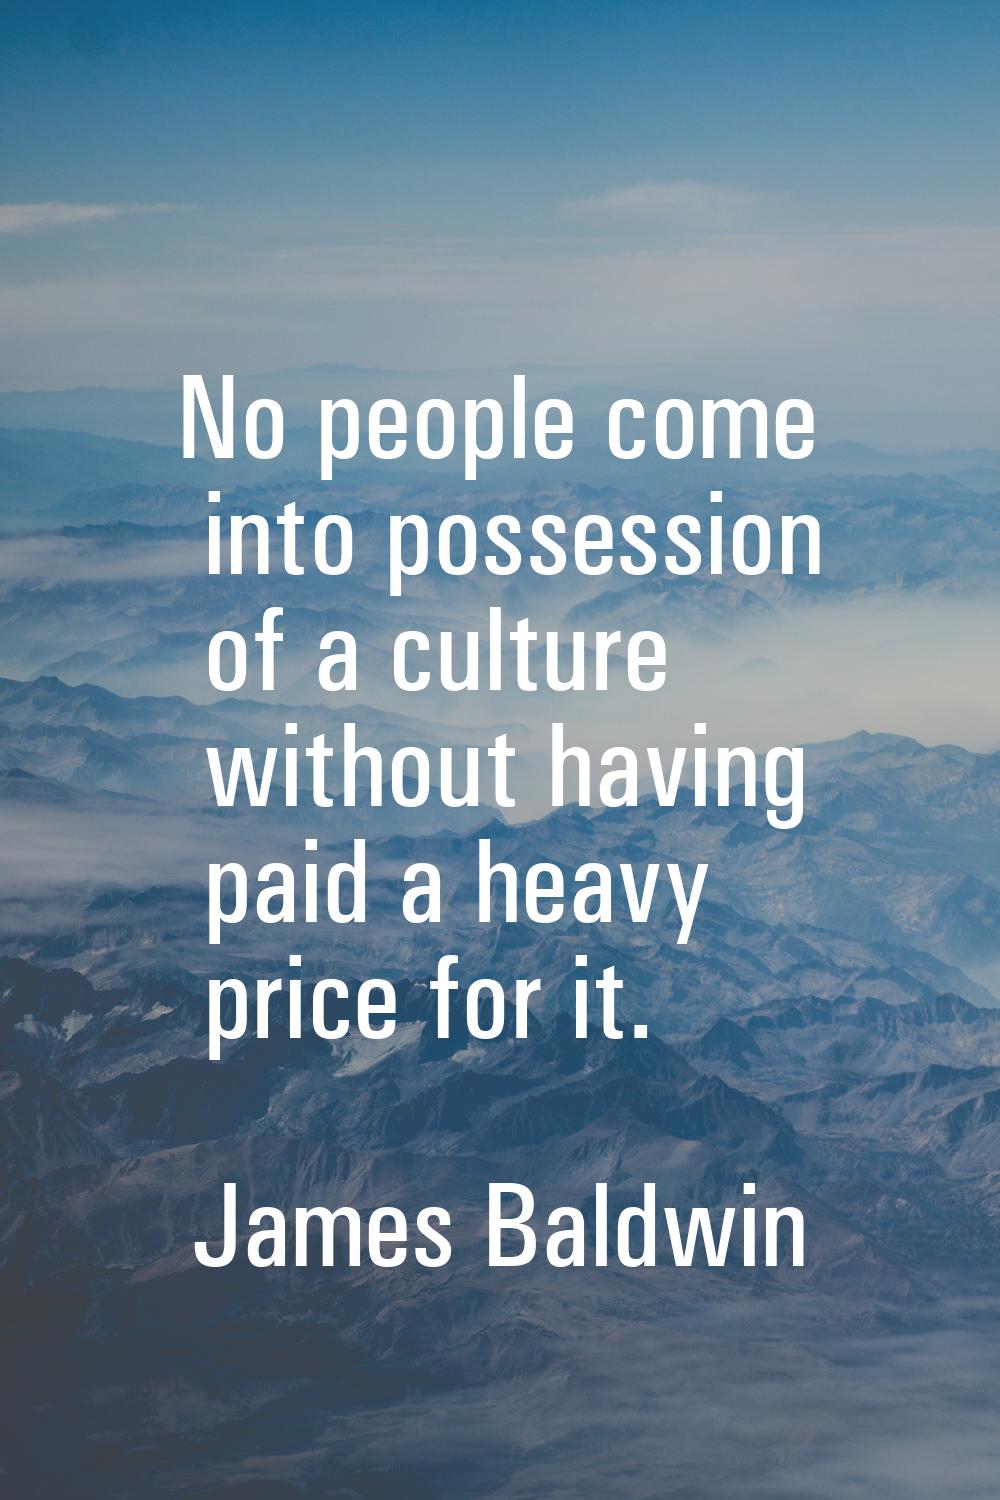 No people come into possession of a culture without having paid a heavy price for it.